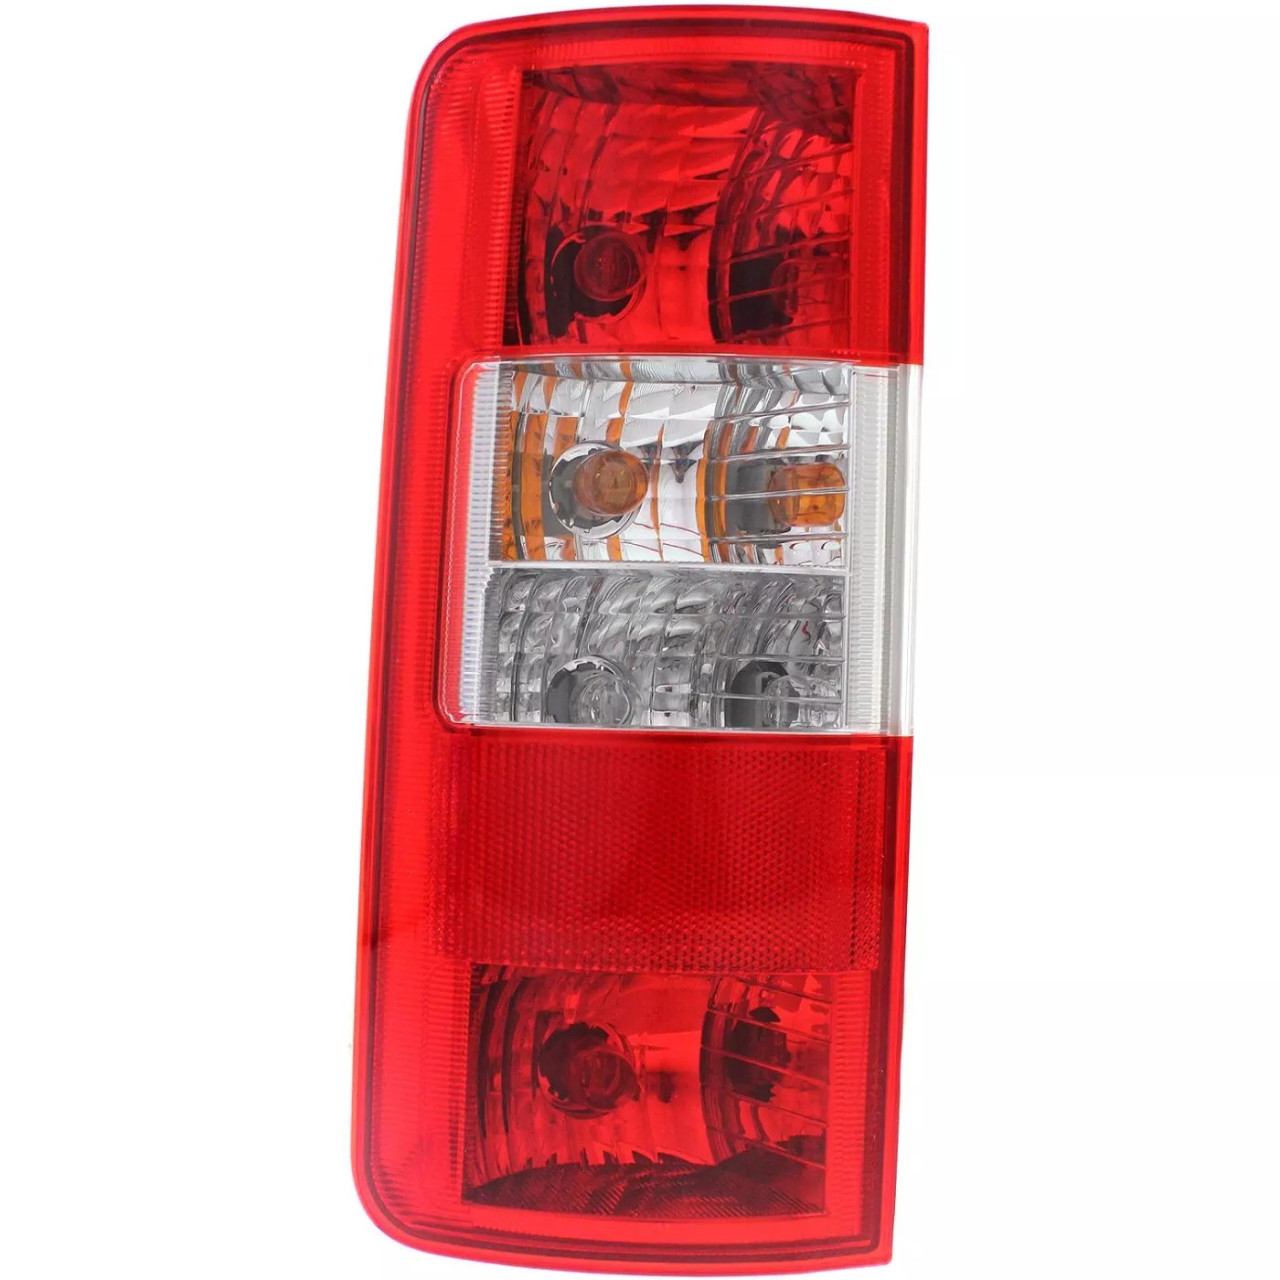 Set of 2 Tail Light For 2010-2013 Ford Transit Connect XLT LH & RH